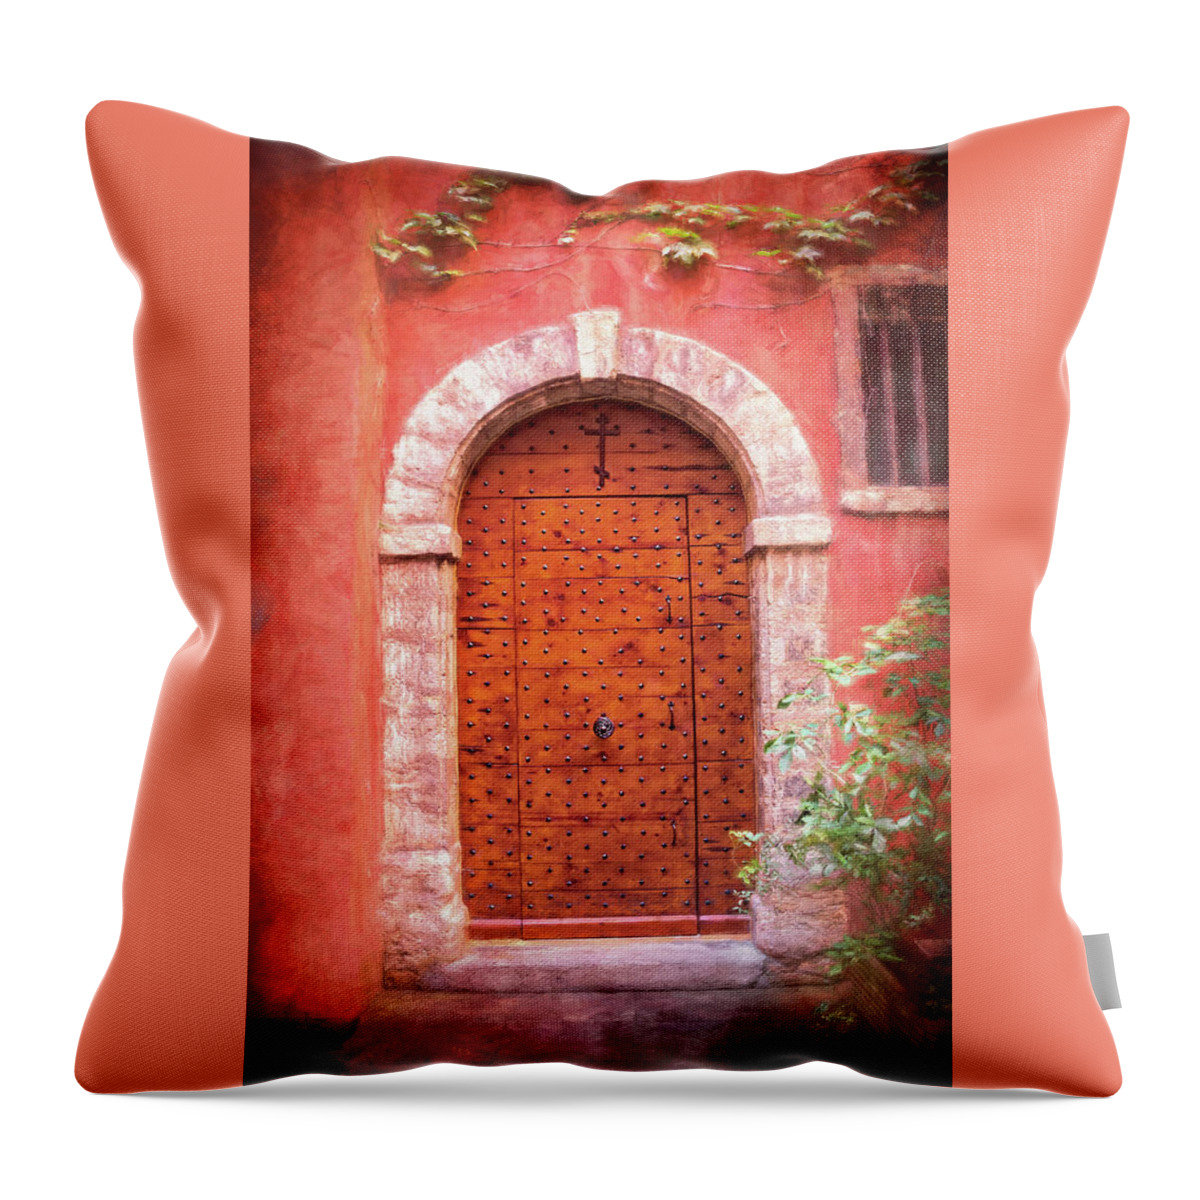 Lyon Throw Pillow featuring the photograph A Delightful Doorway Lyon France by Carol Japp